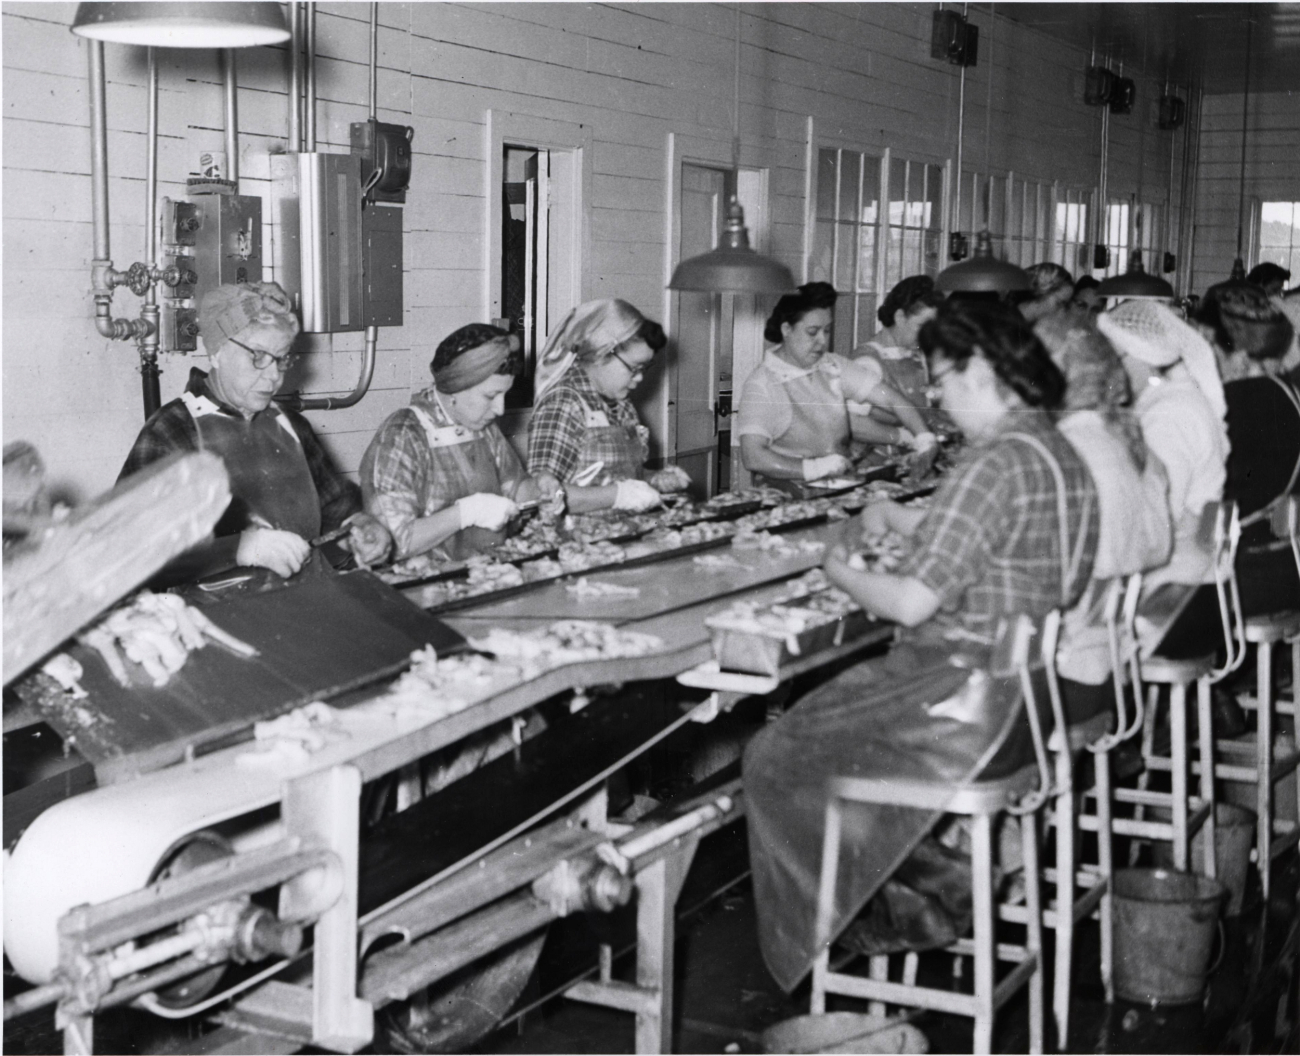 Women on the clam processing line